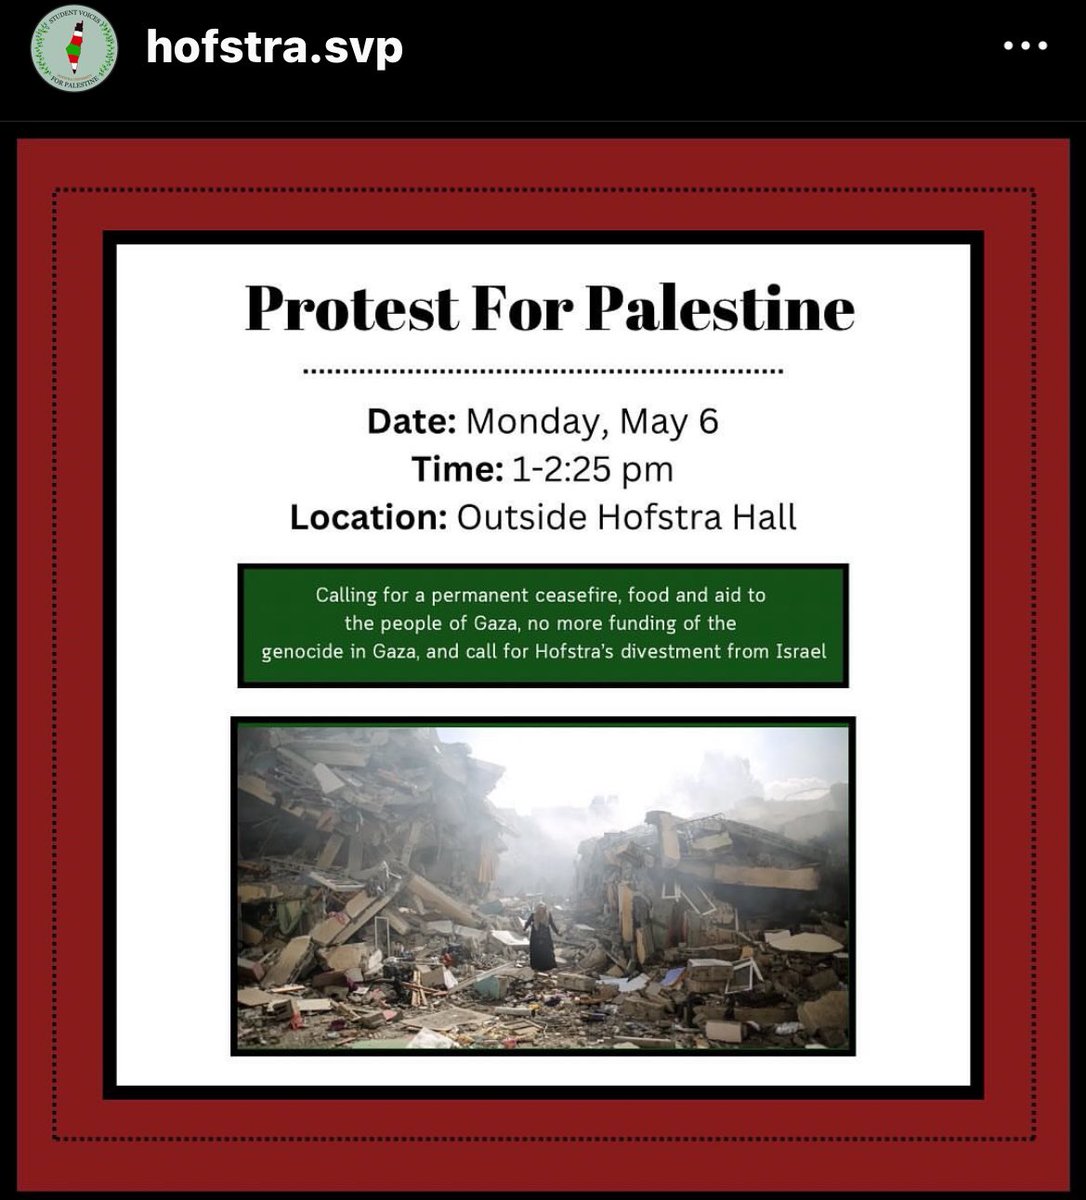 Monday May 6th is Yom HaShoah. This is a complete lack of respect for Jews on this day of mourning. The Jews in Israel have been attacked on Yom Kippur, and Simchat Torah among many others. Why must we be subjected to this? Completely insensitive Hofstra.